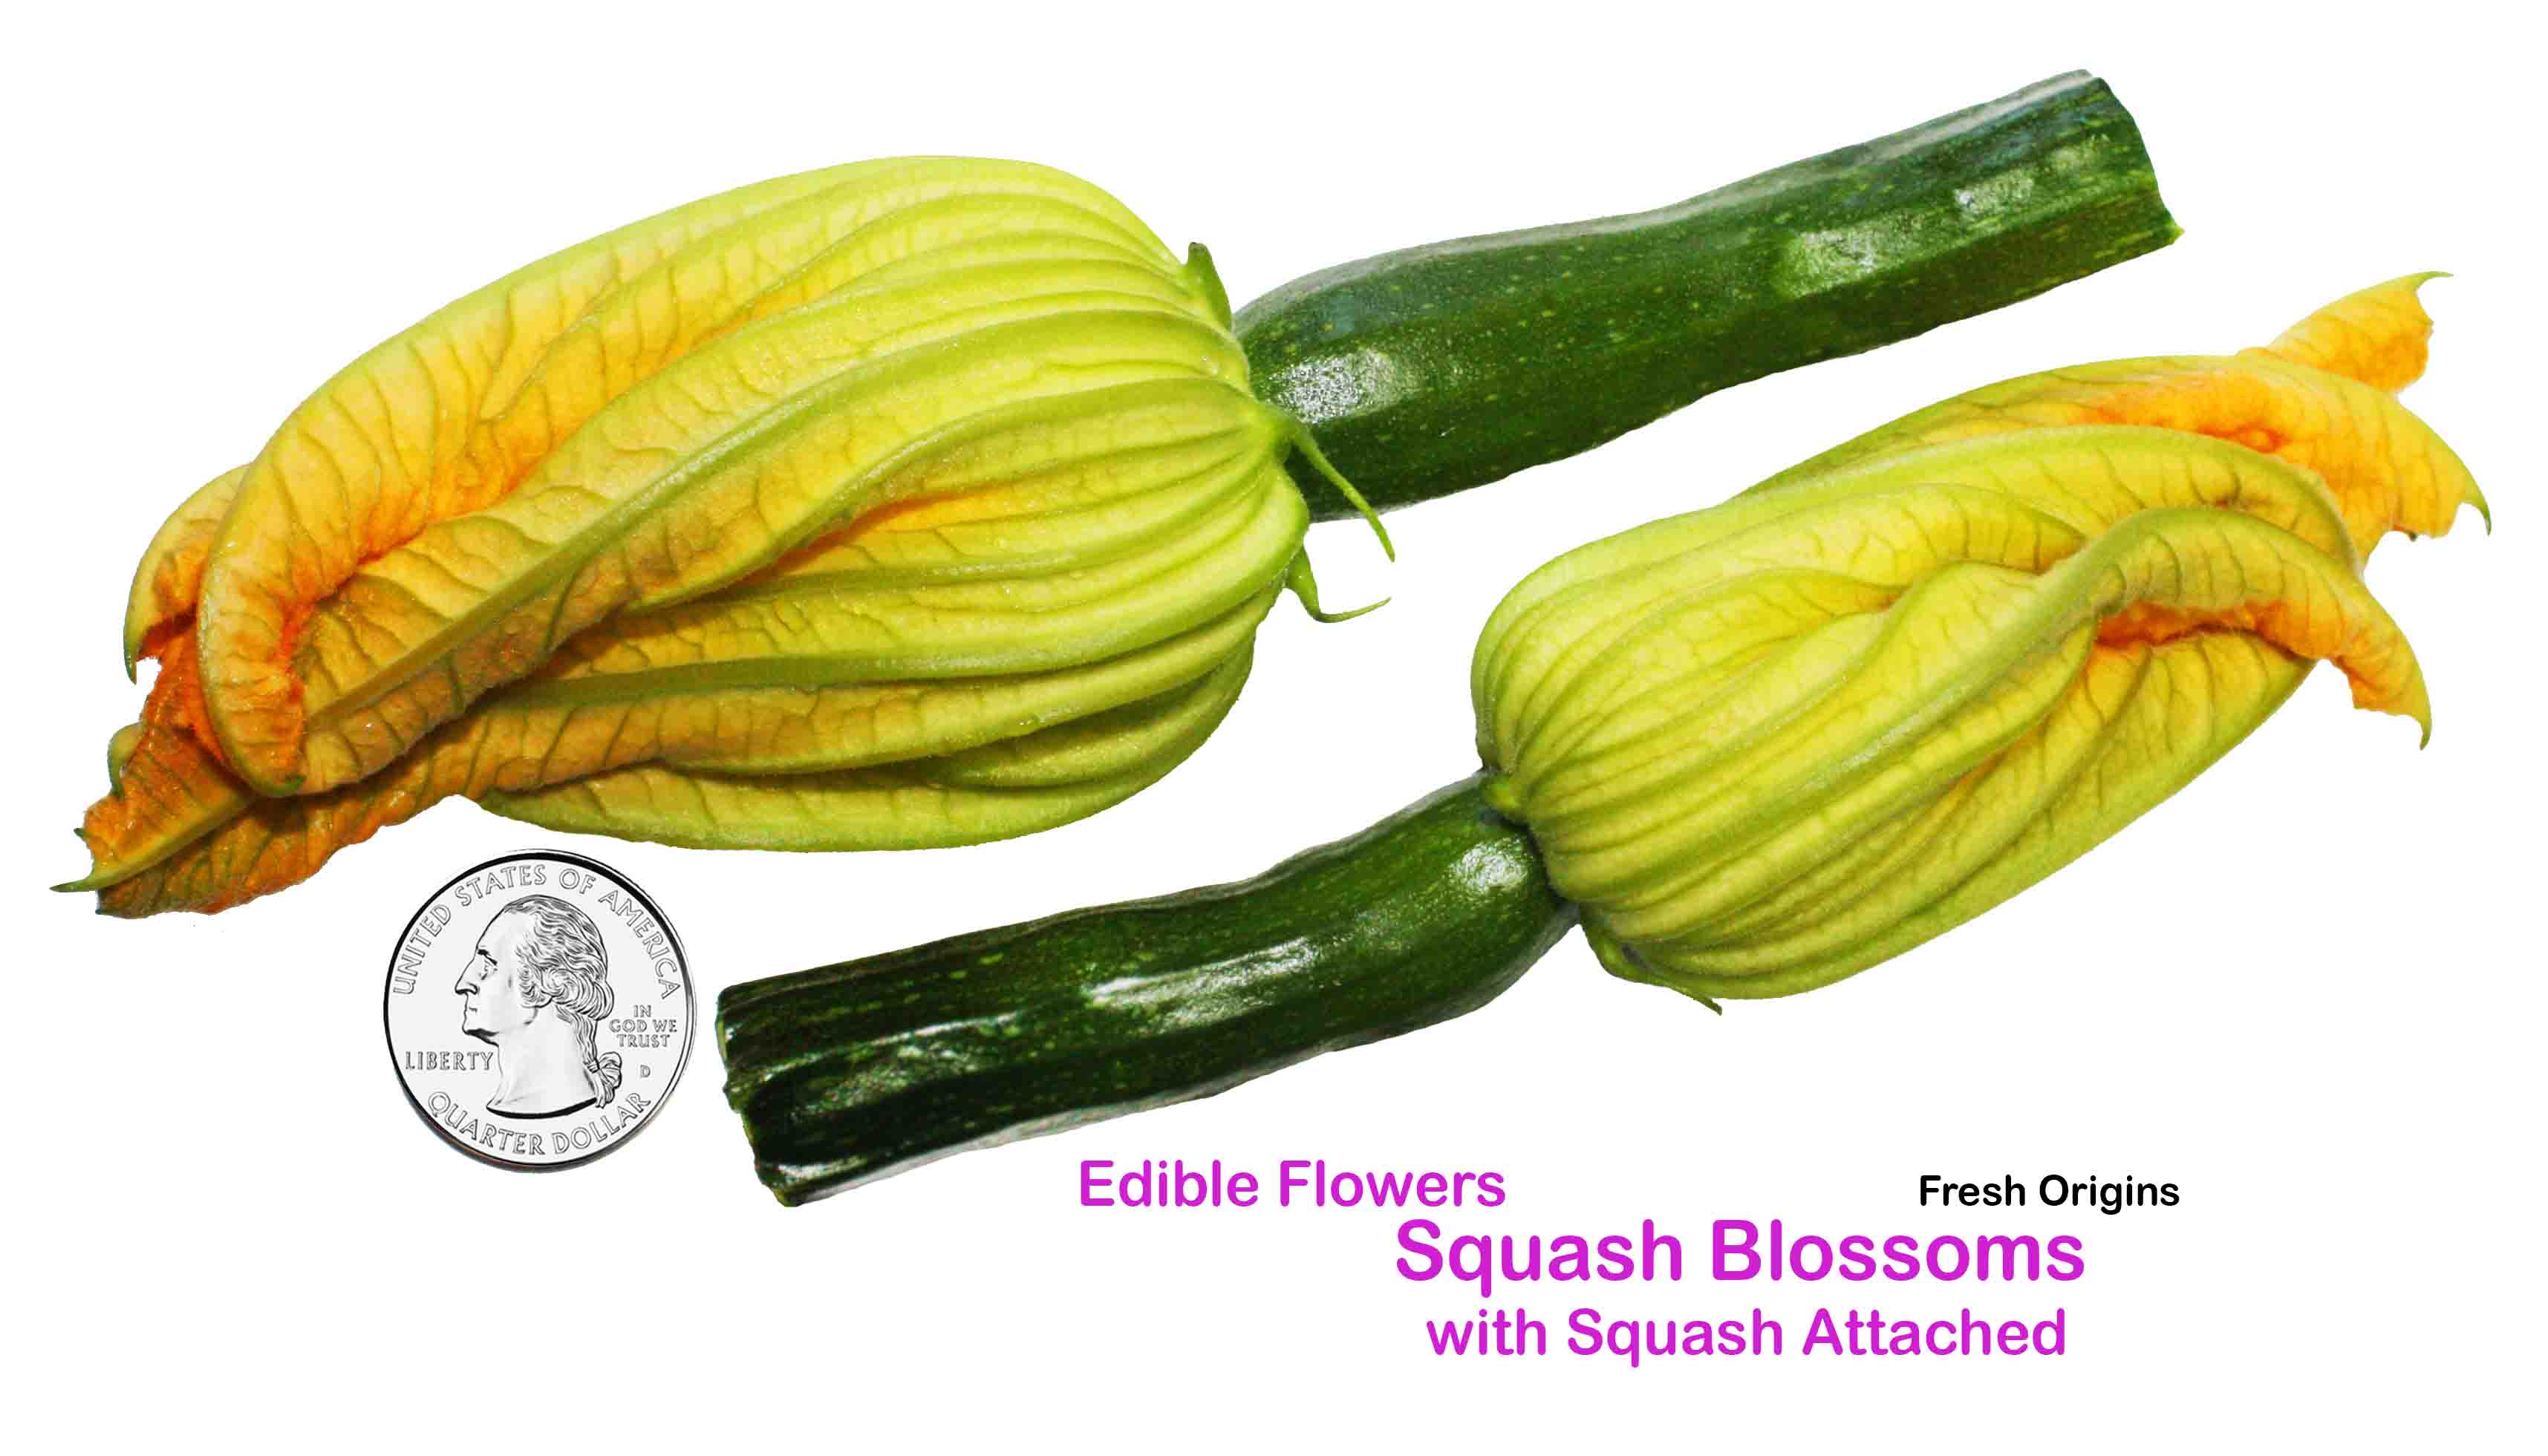 SQUASH BLOSSOM, YELLOW EDIBLE BLOOMING 25 COUNT W/ SQUASH ATTACHED ...